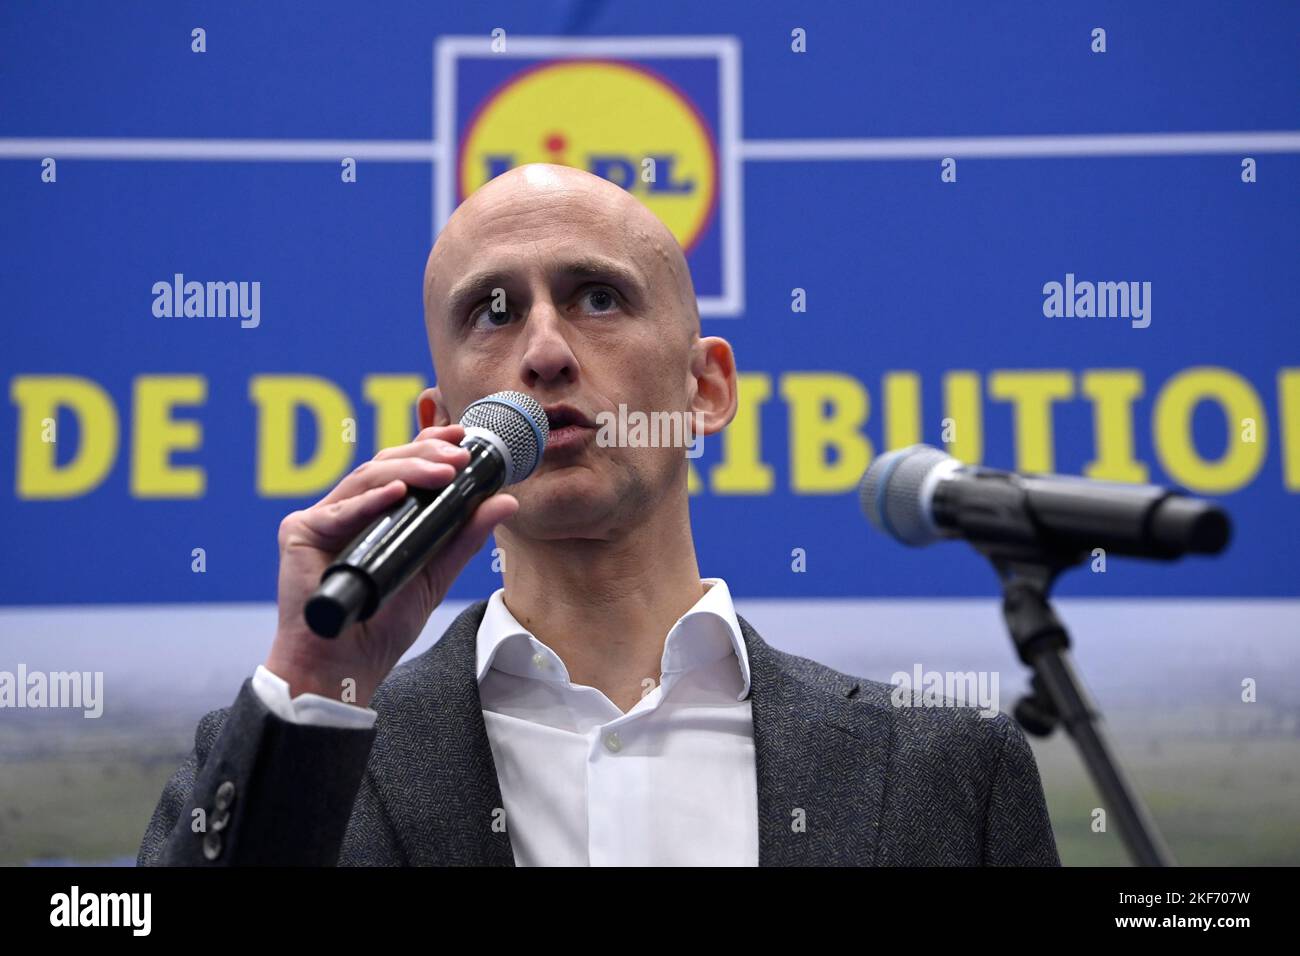 Matthias Deleu CEO Director Regional Lidl talks during the inauguration of  the Lidl distribution centre in La Louviere, Wednesday 16 November 2022, in  La Louviere. The new Lidl distribution centre will supply